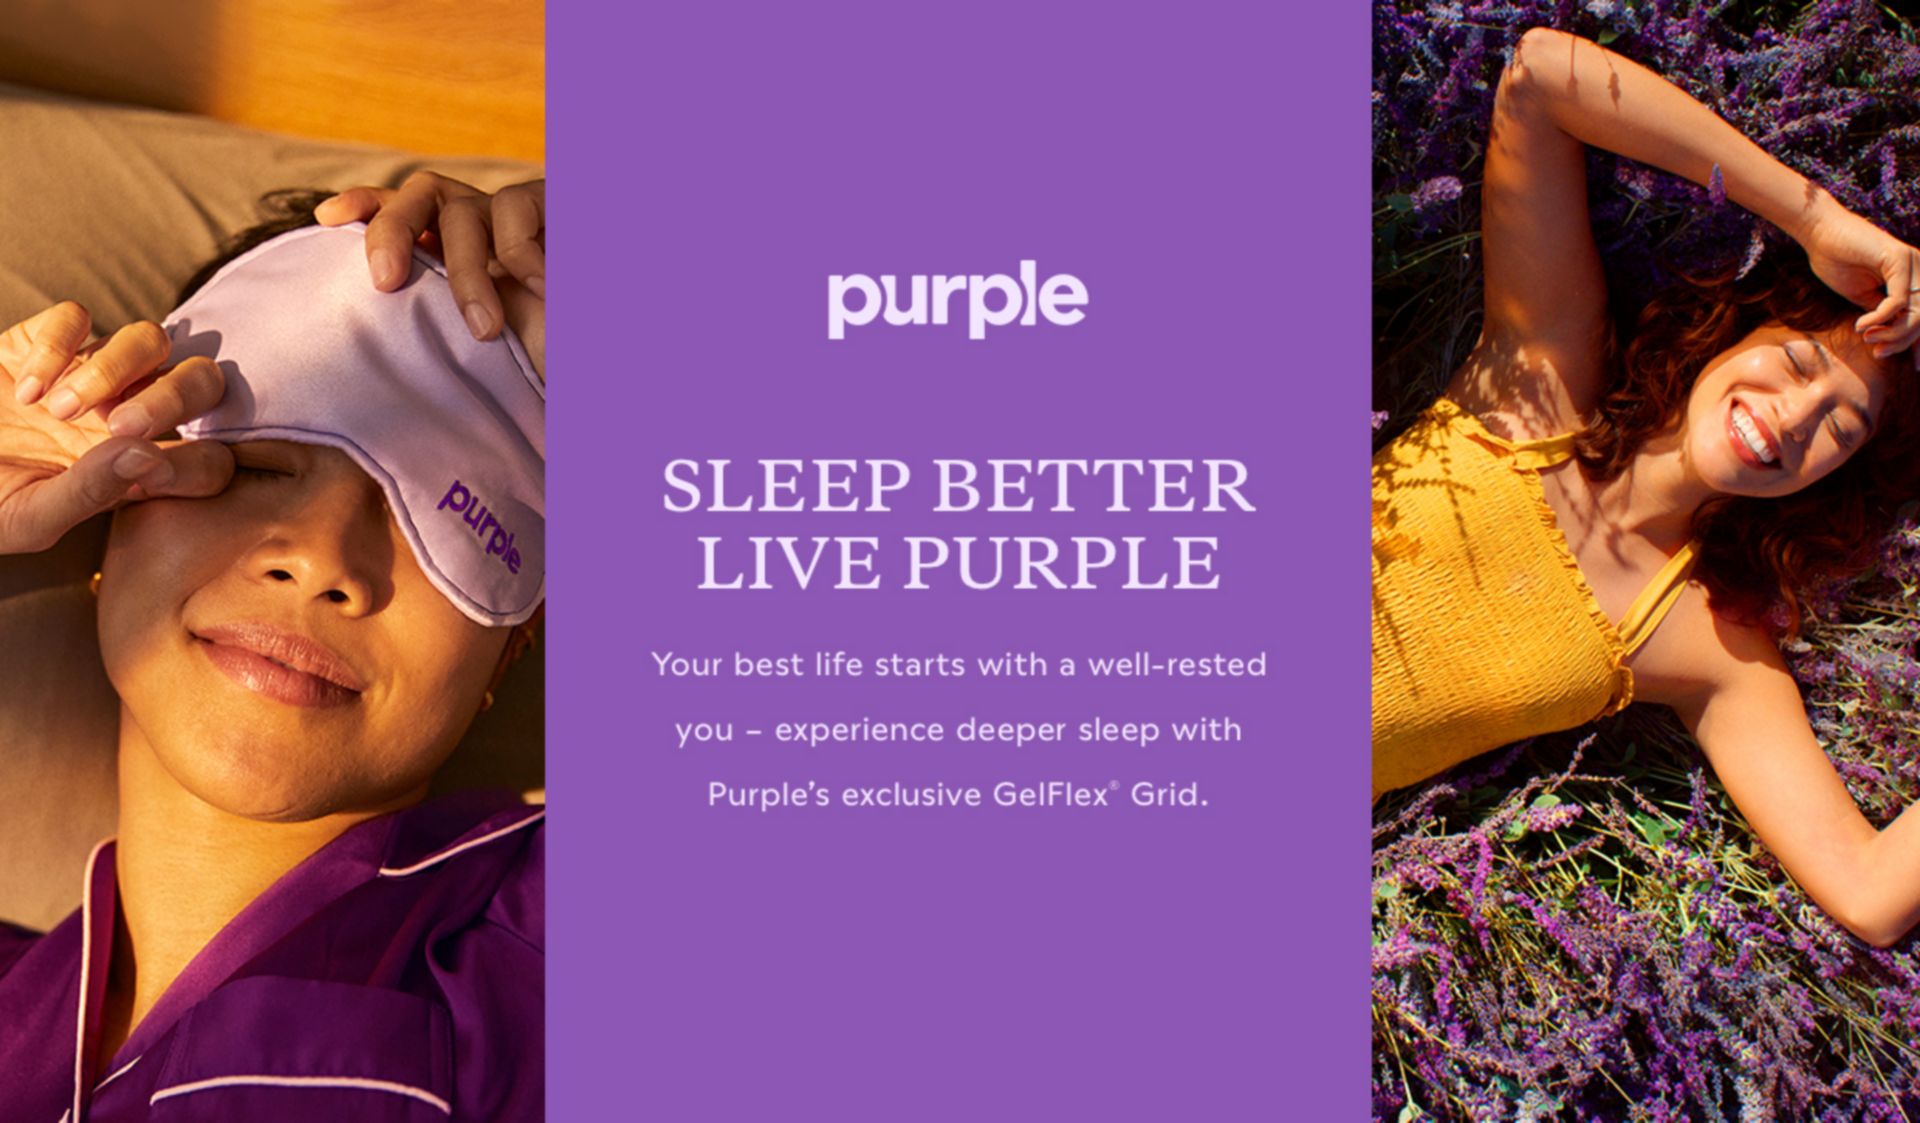 Purple. Sleep Better Live Purple. Your best life starts with a well-rested you - experience deeper sleep with Purple's exclusive GelFlex Grid.